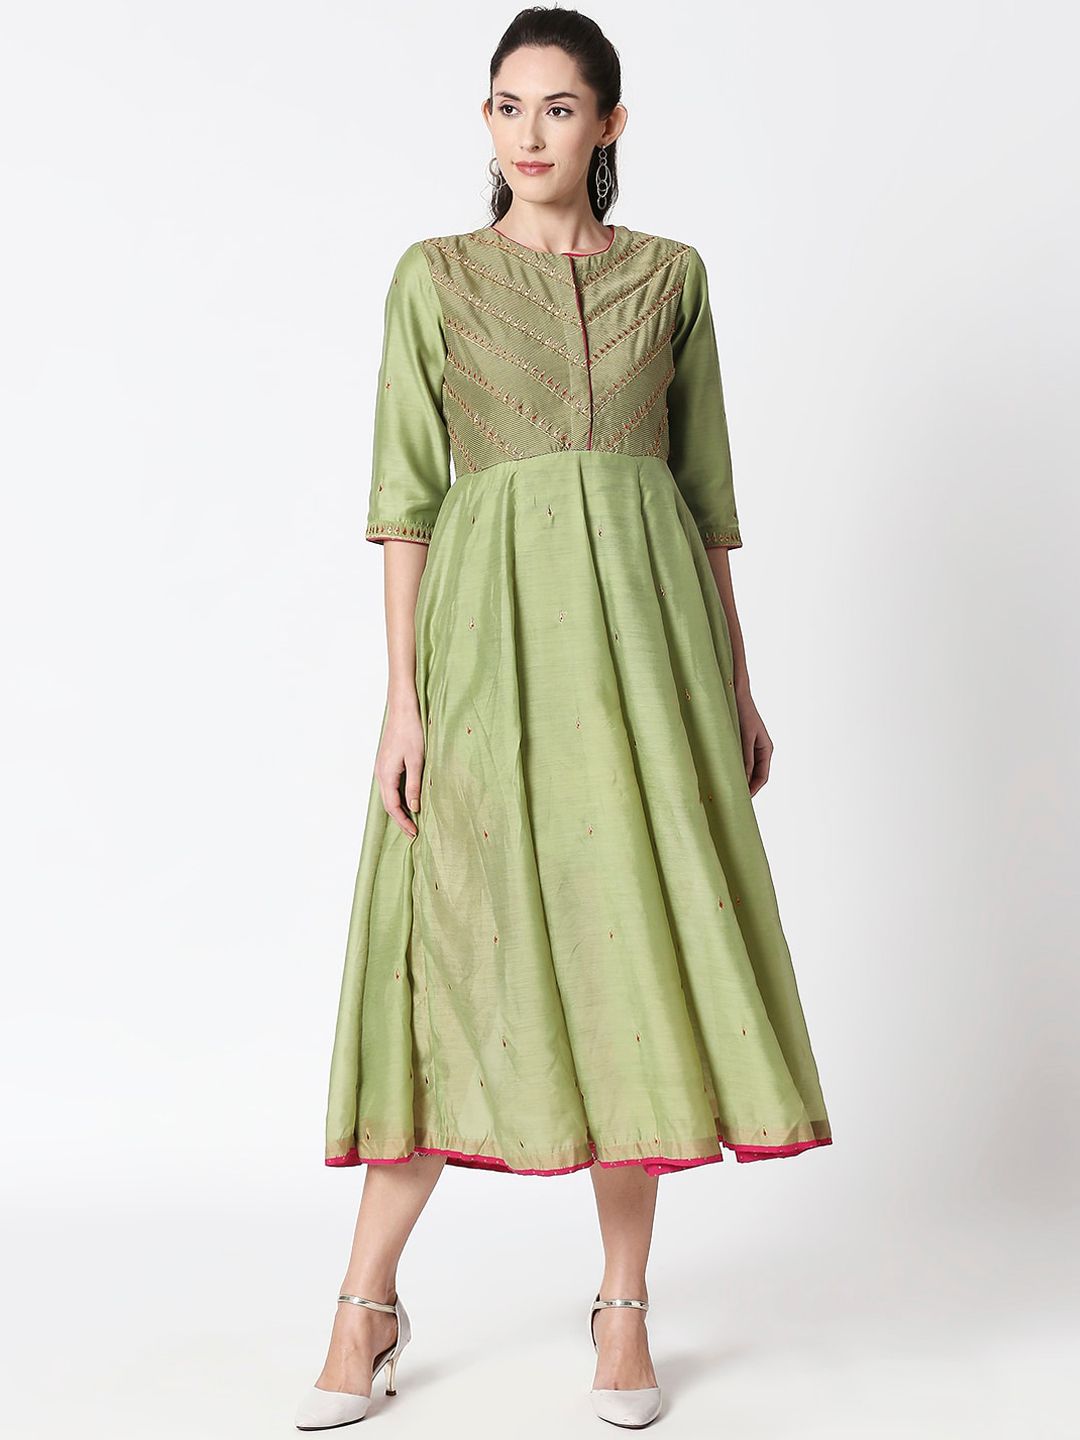 RANGMANCH BY PANTALOONS Women Green Self Design Fit and Flare Dress Price in India